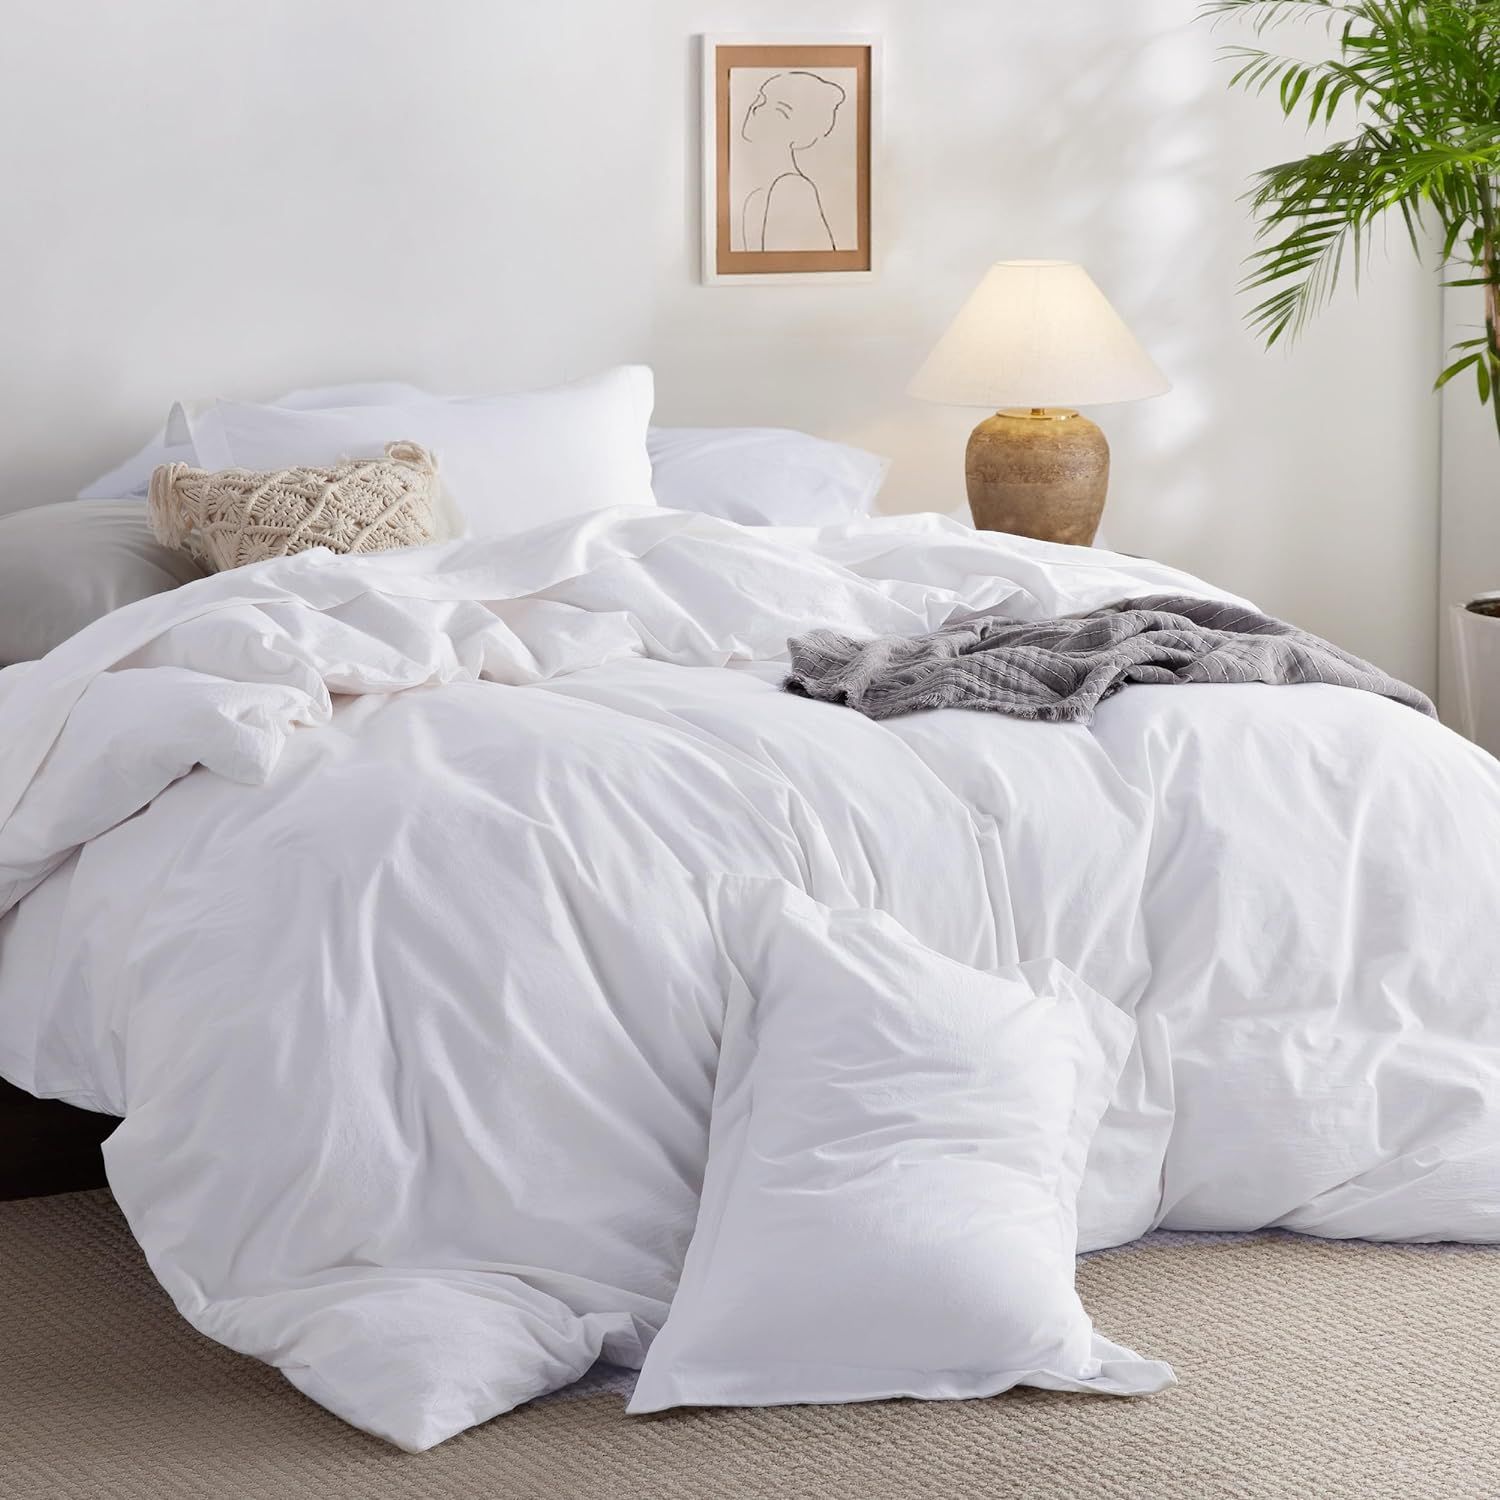 Bedsure 100% Washed Cotton Duvet Cover Full - Bright White Minimalist Duvet Cover for All Seasons... | Amazon (US)